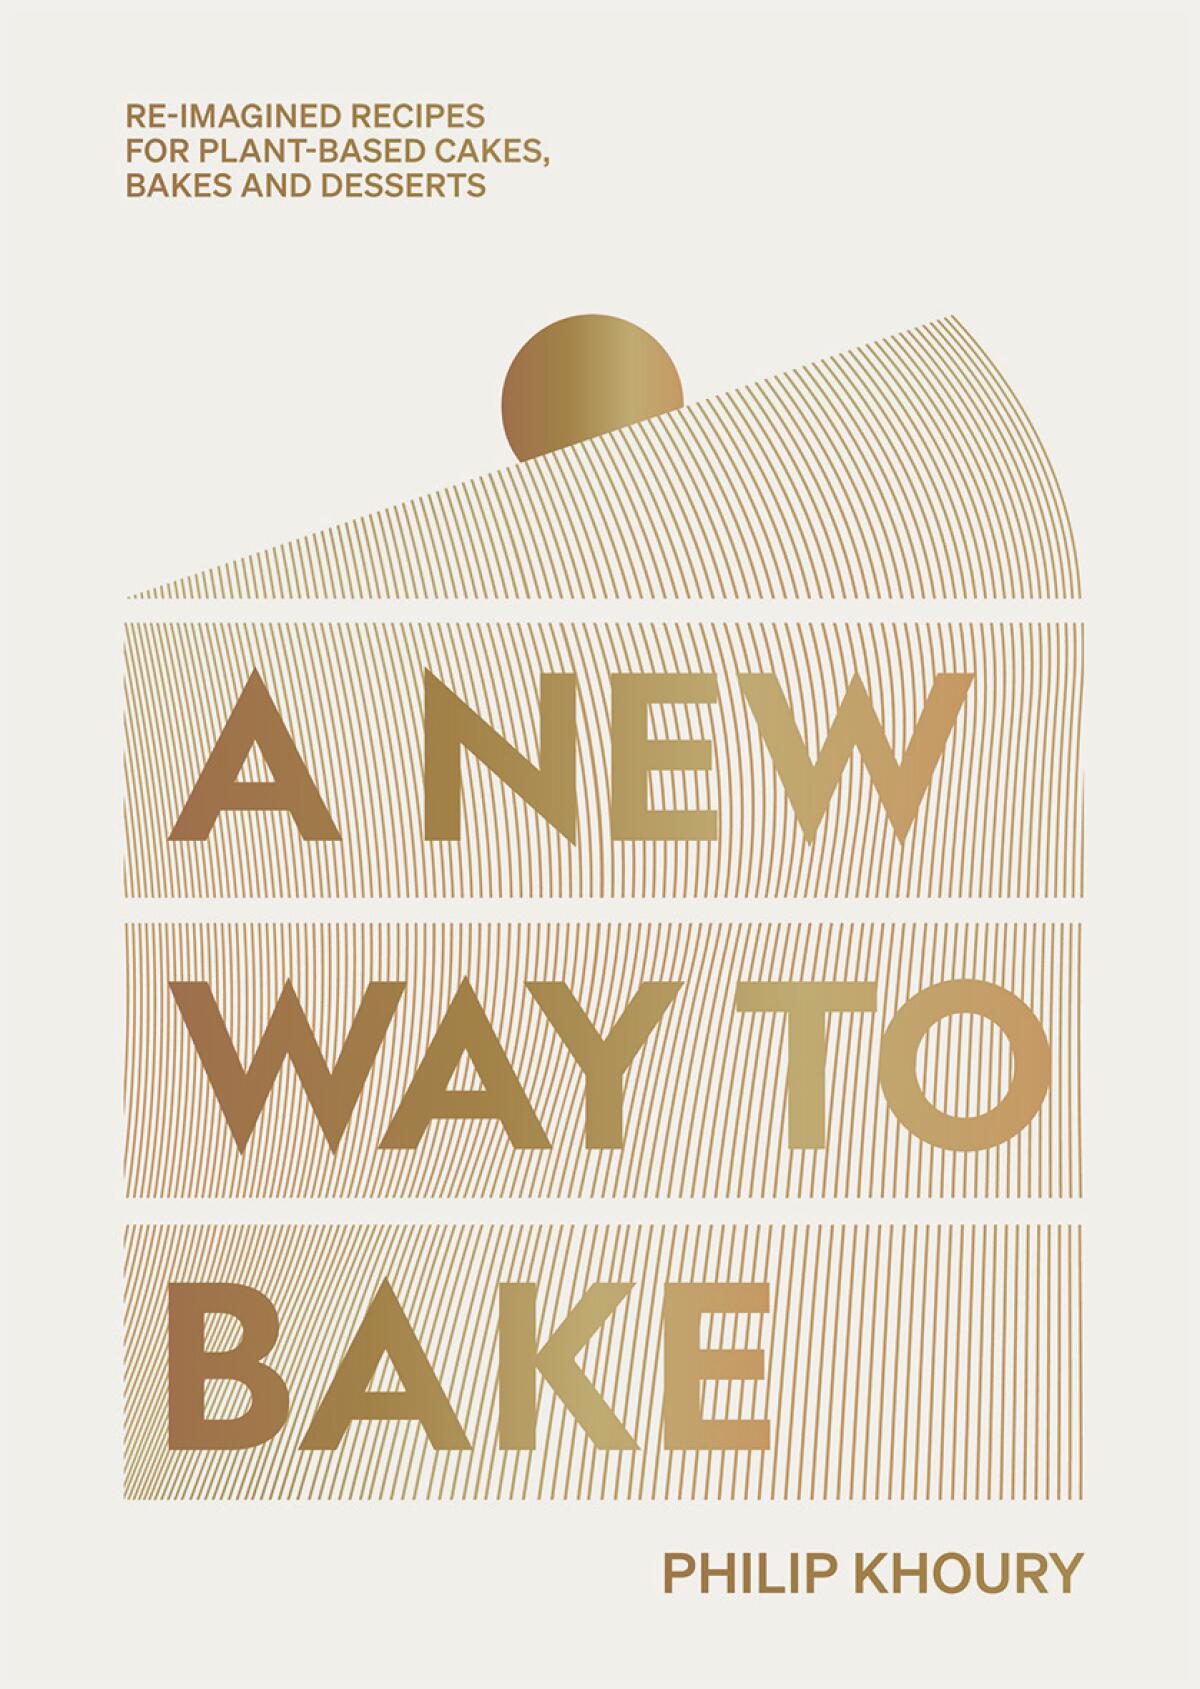 The cover of cookbook "A New Way to Bake": a minimalist, gold-leaf illustration of a slice of cake on cream background.